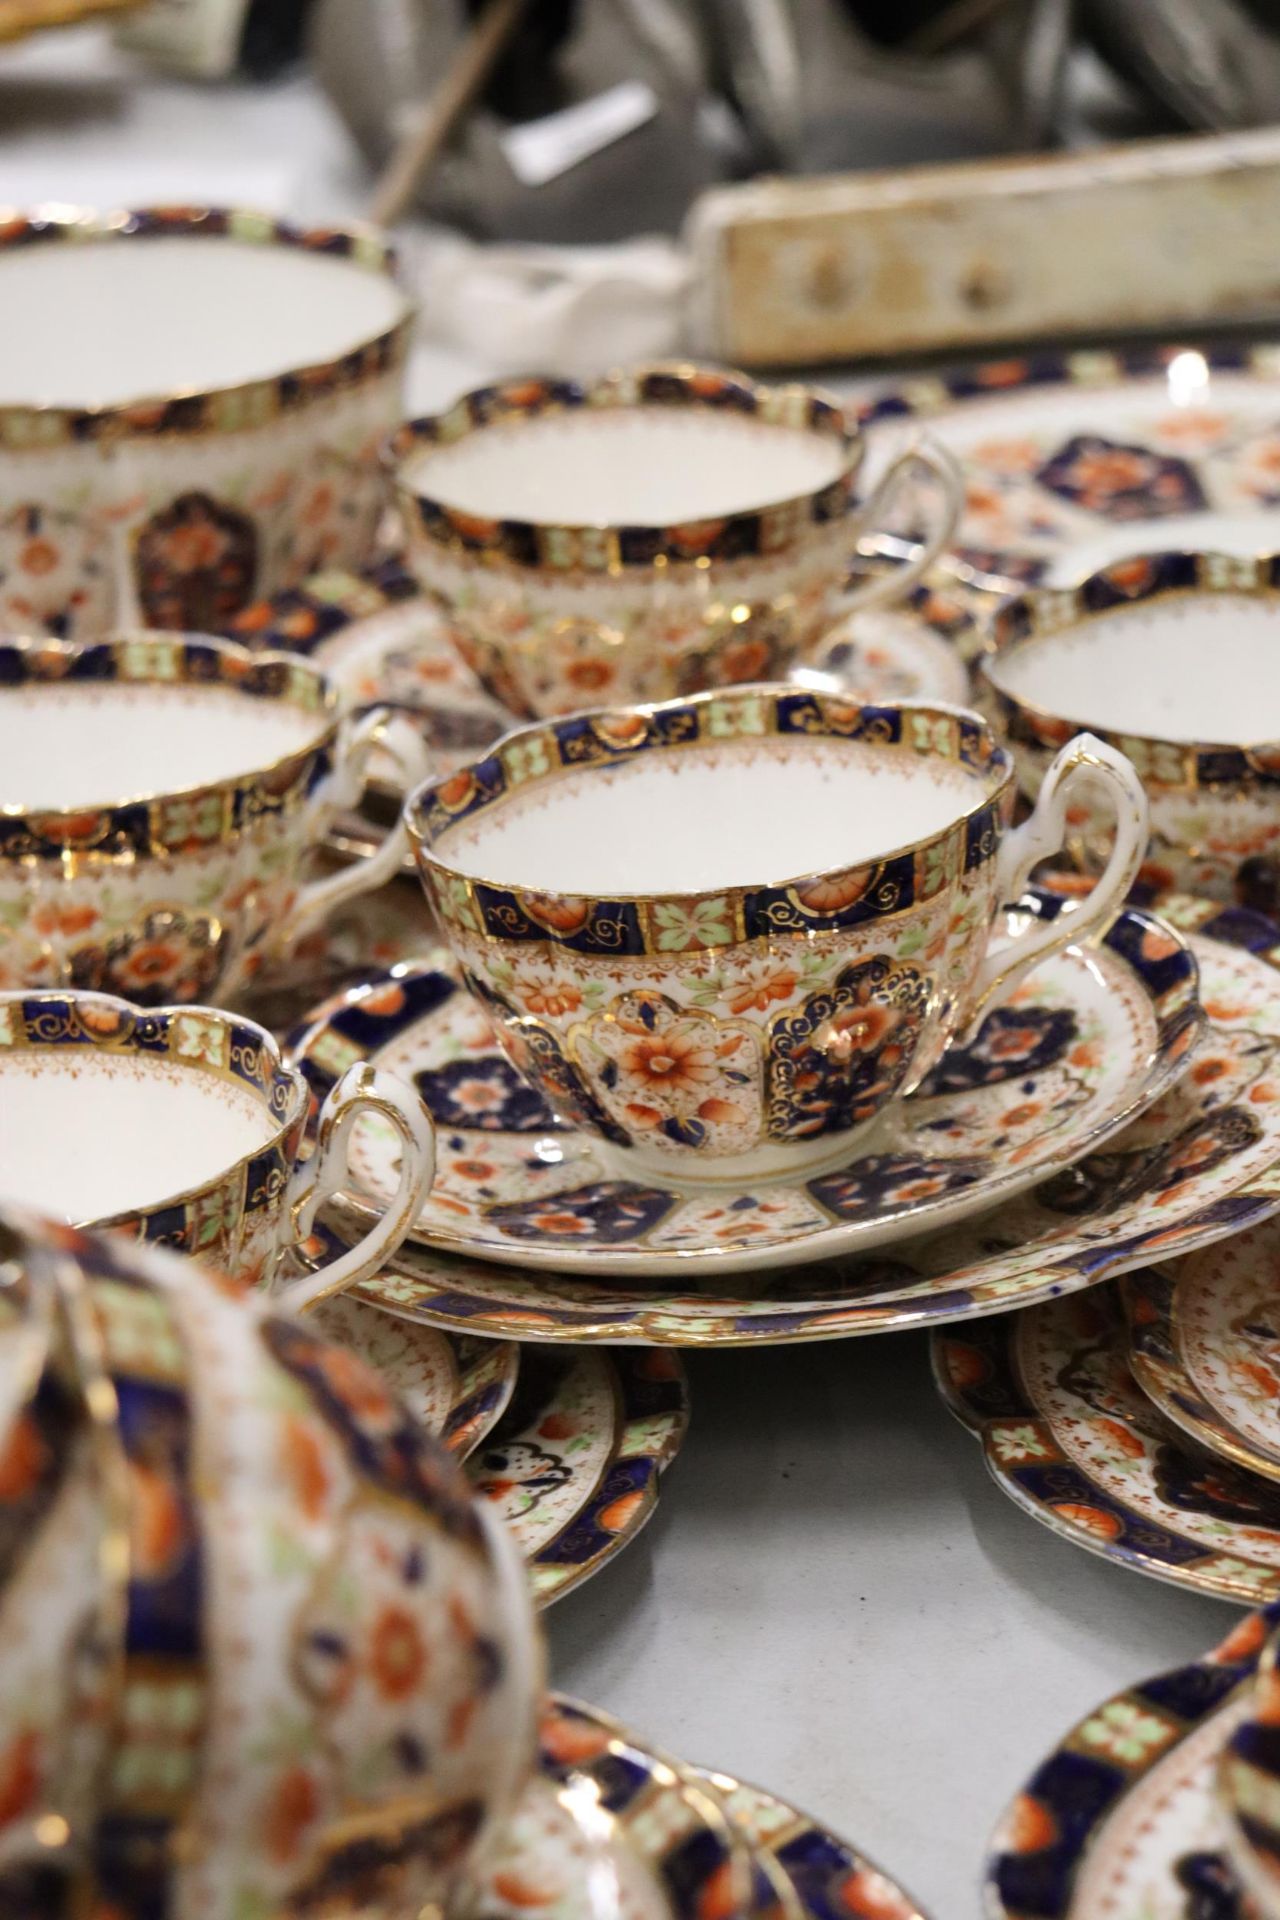 AN ANTIQUE 'COURT CHINA' TEASET TO INCLUDE CAKE PLATES, CUPS, SAUCERS, SIDE PLATES AND A SUGAR BOWL - Image 3 of 9